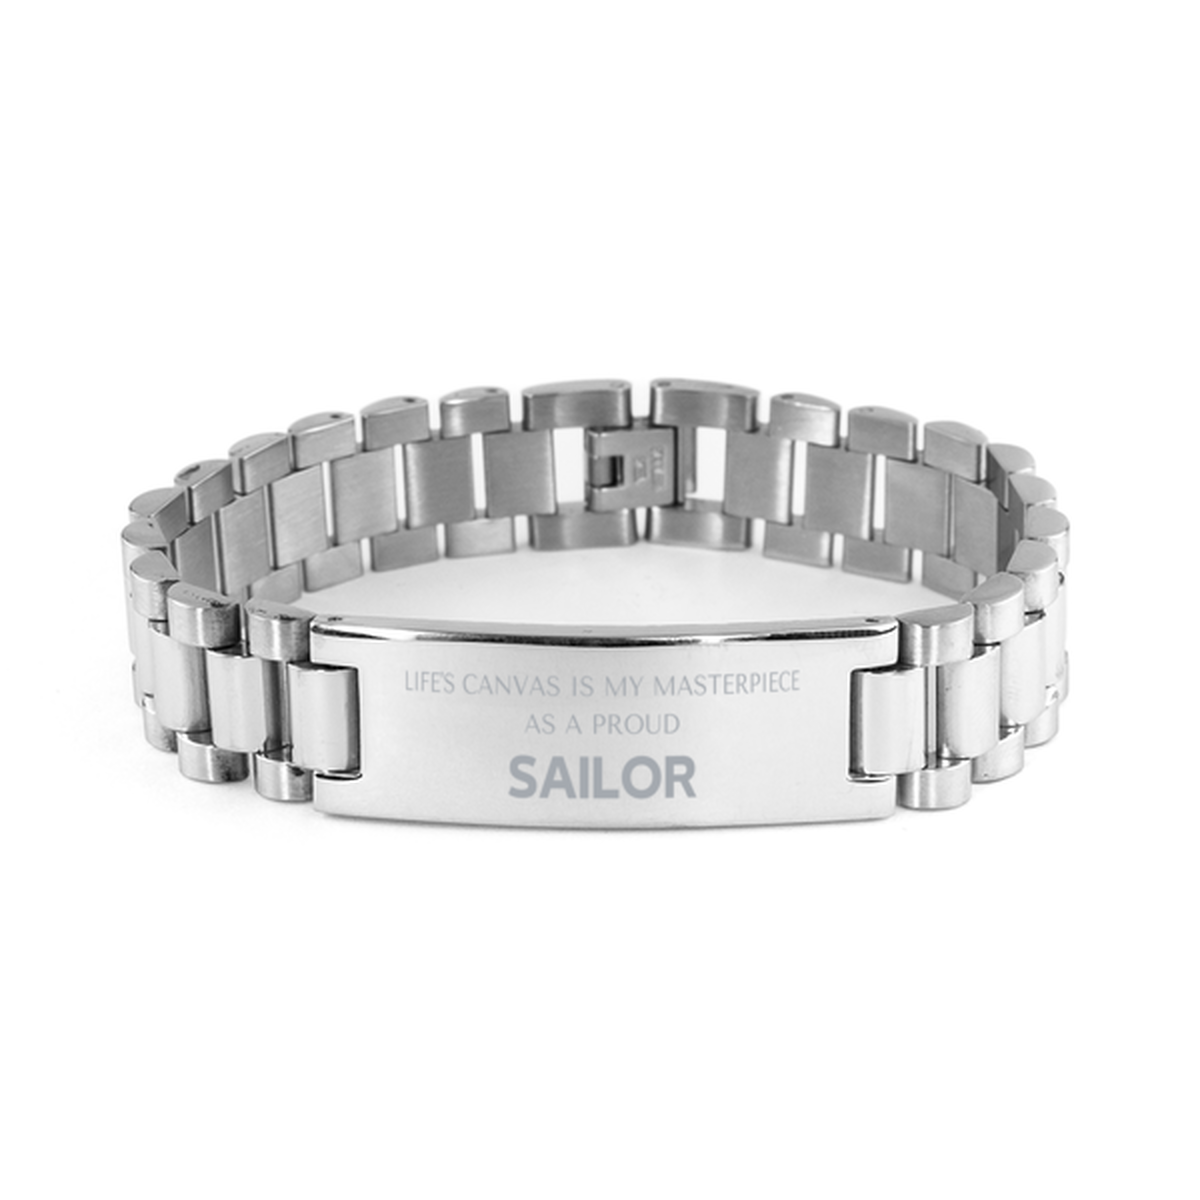 Proud Sailor Gifts, Life's canvas is my masterpiece, Epic Birthday Christmas Unique Ladder Stainless Steel Bracelet For Sailor, Coworkers, Men, Women, Friends